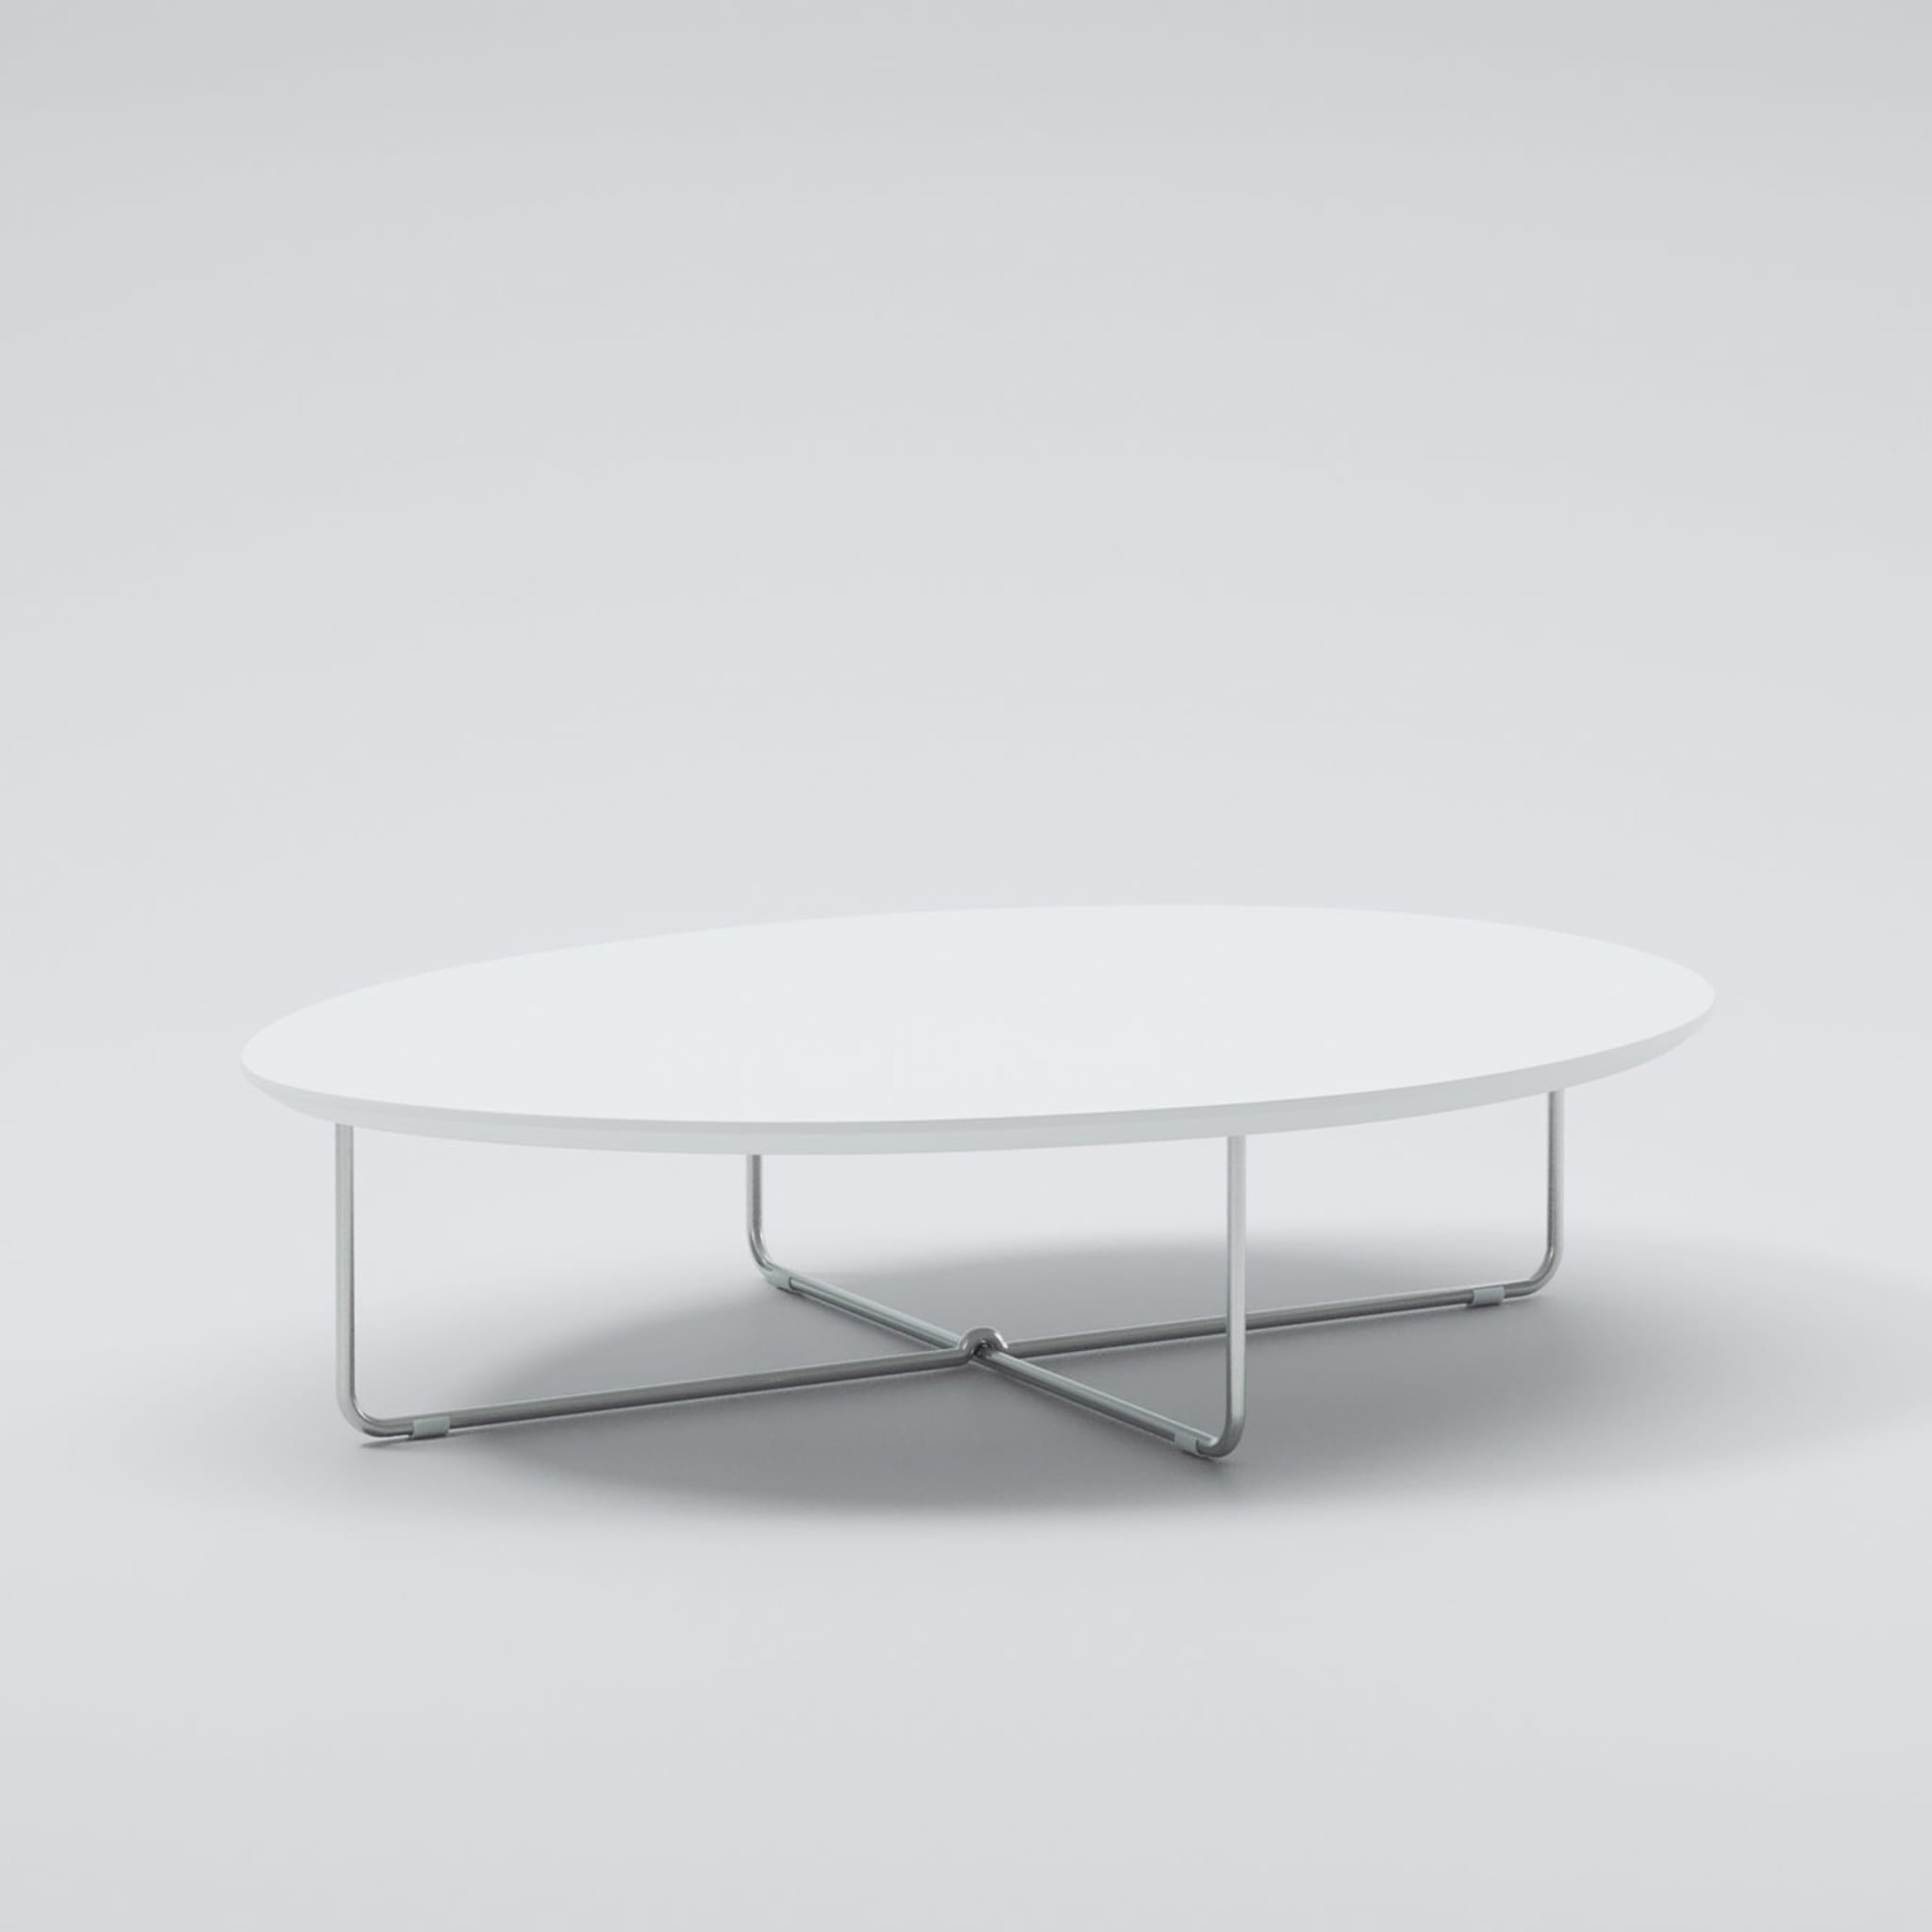 Amarcord White Low Table  - Alternative view 1